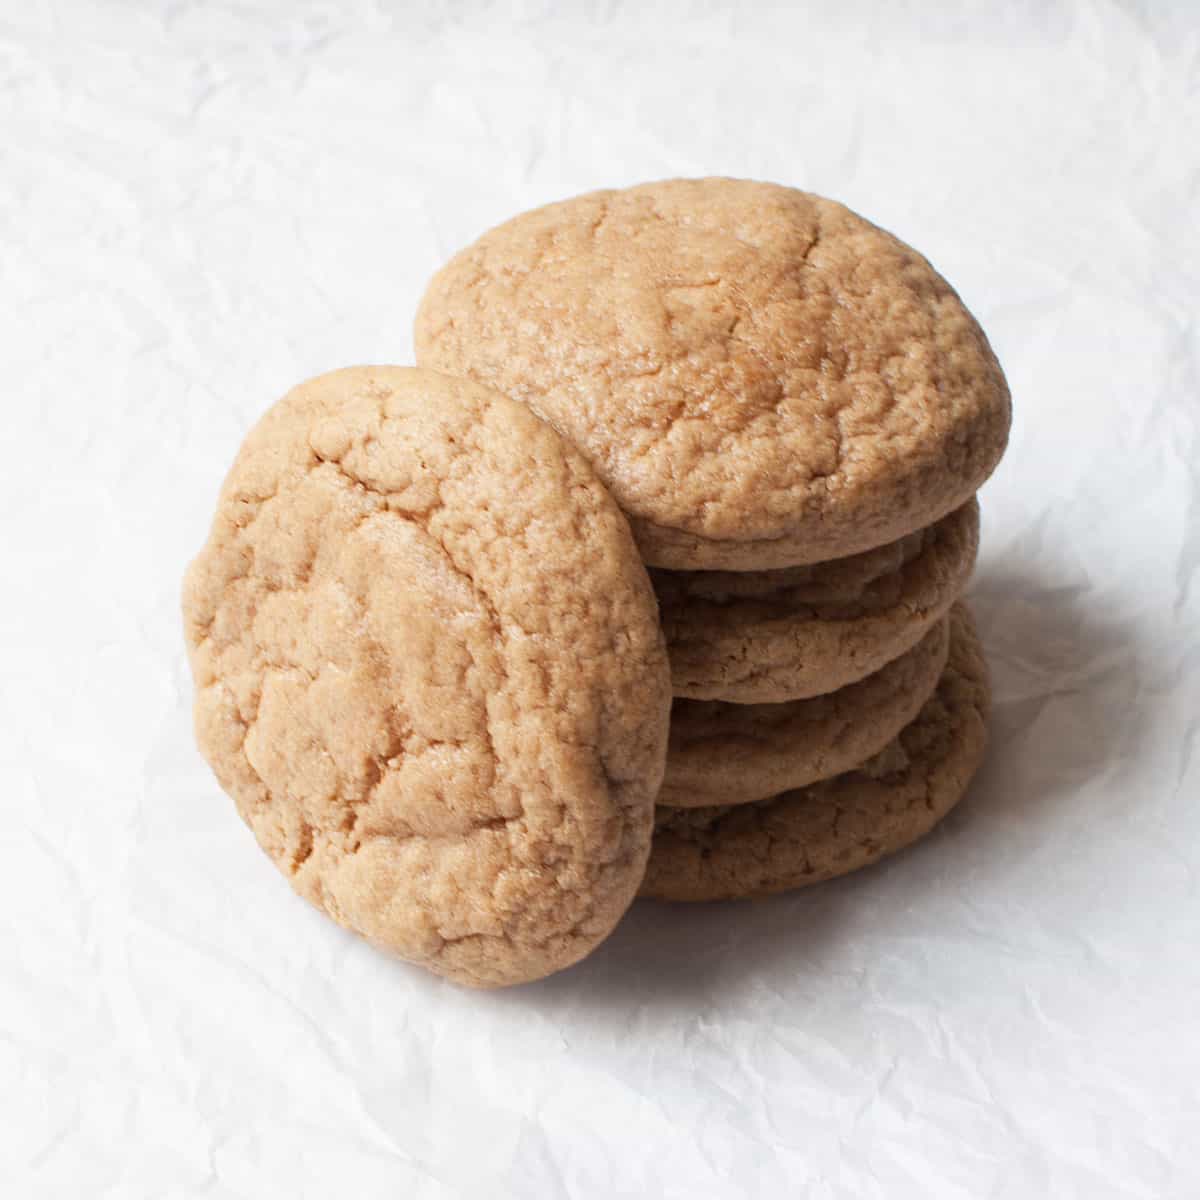 sourdough discard peanut butter cookies stacked up